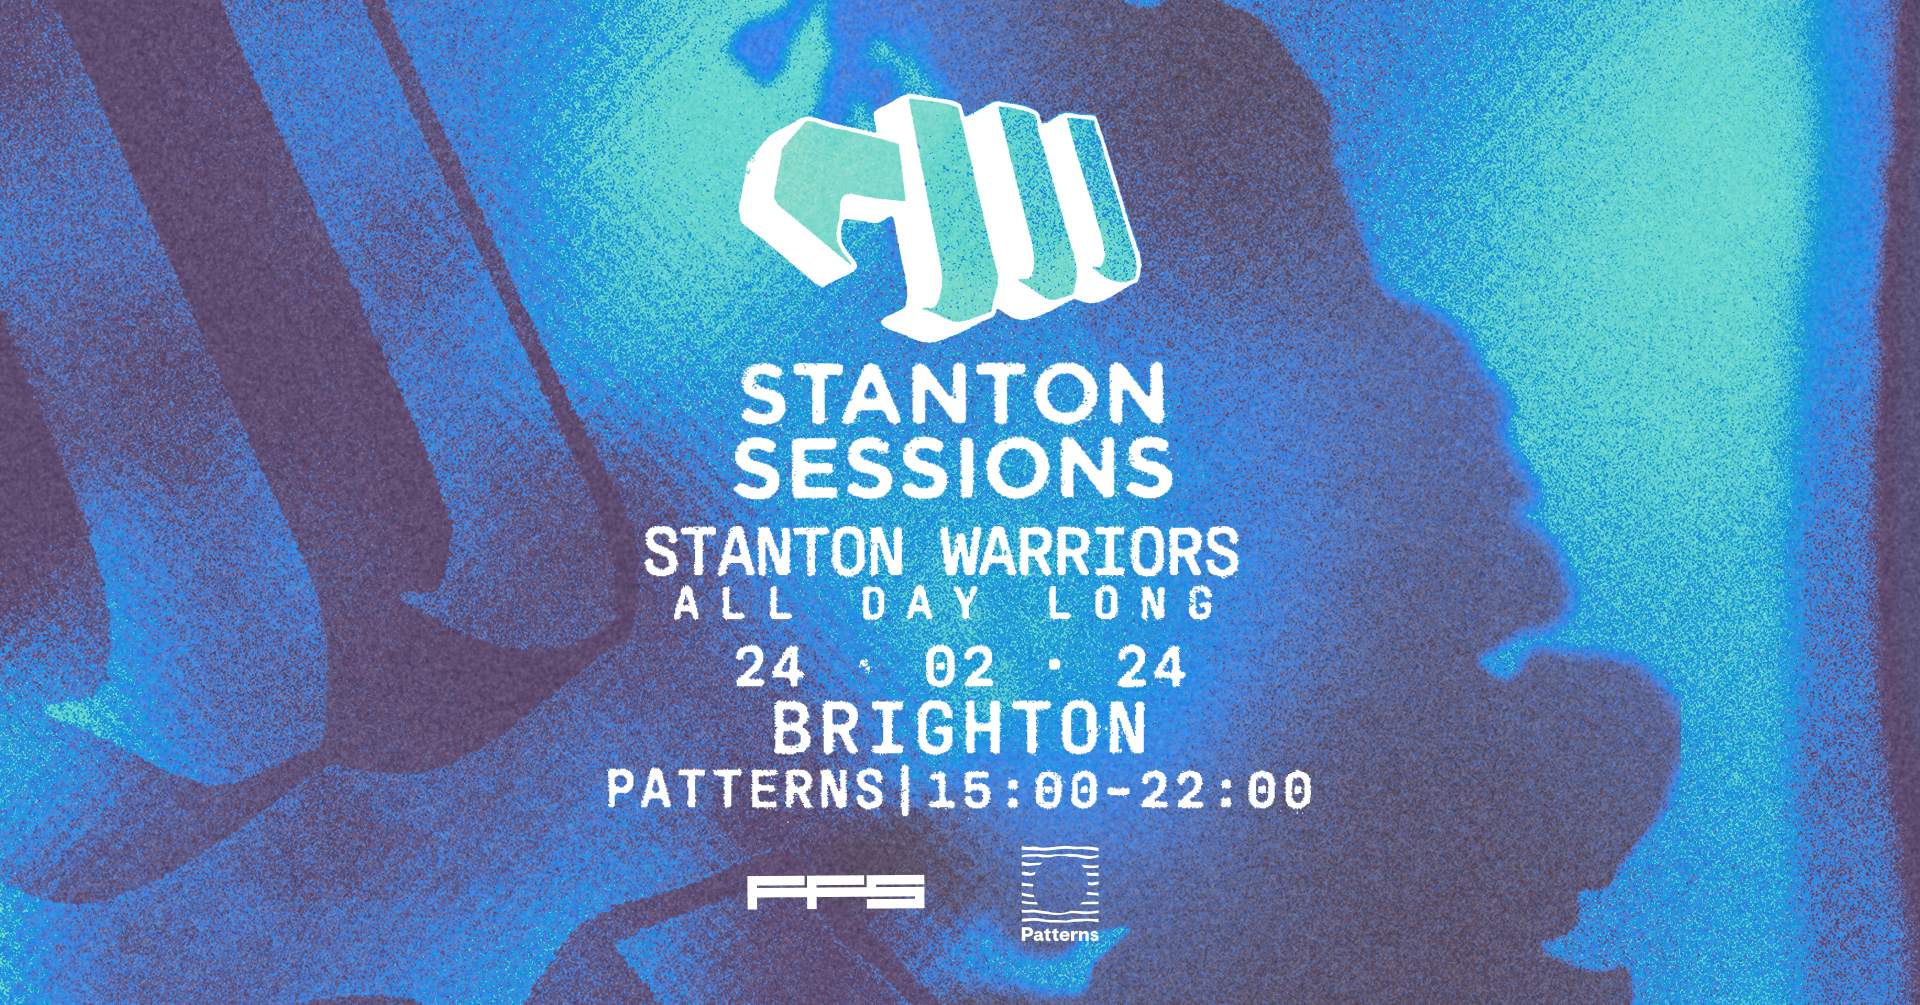 Stanton Sessions: All Day Long - Brighton - Página frontal